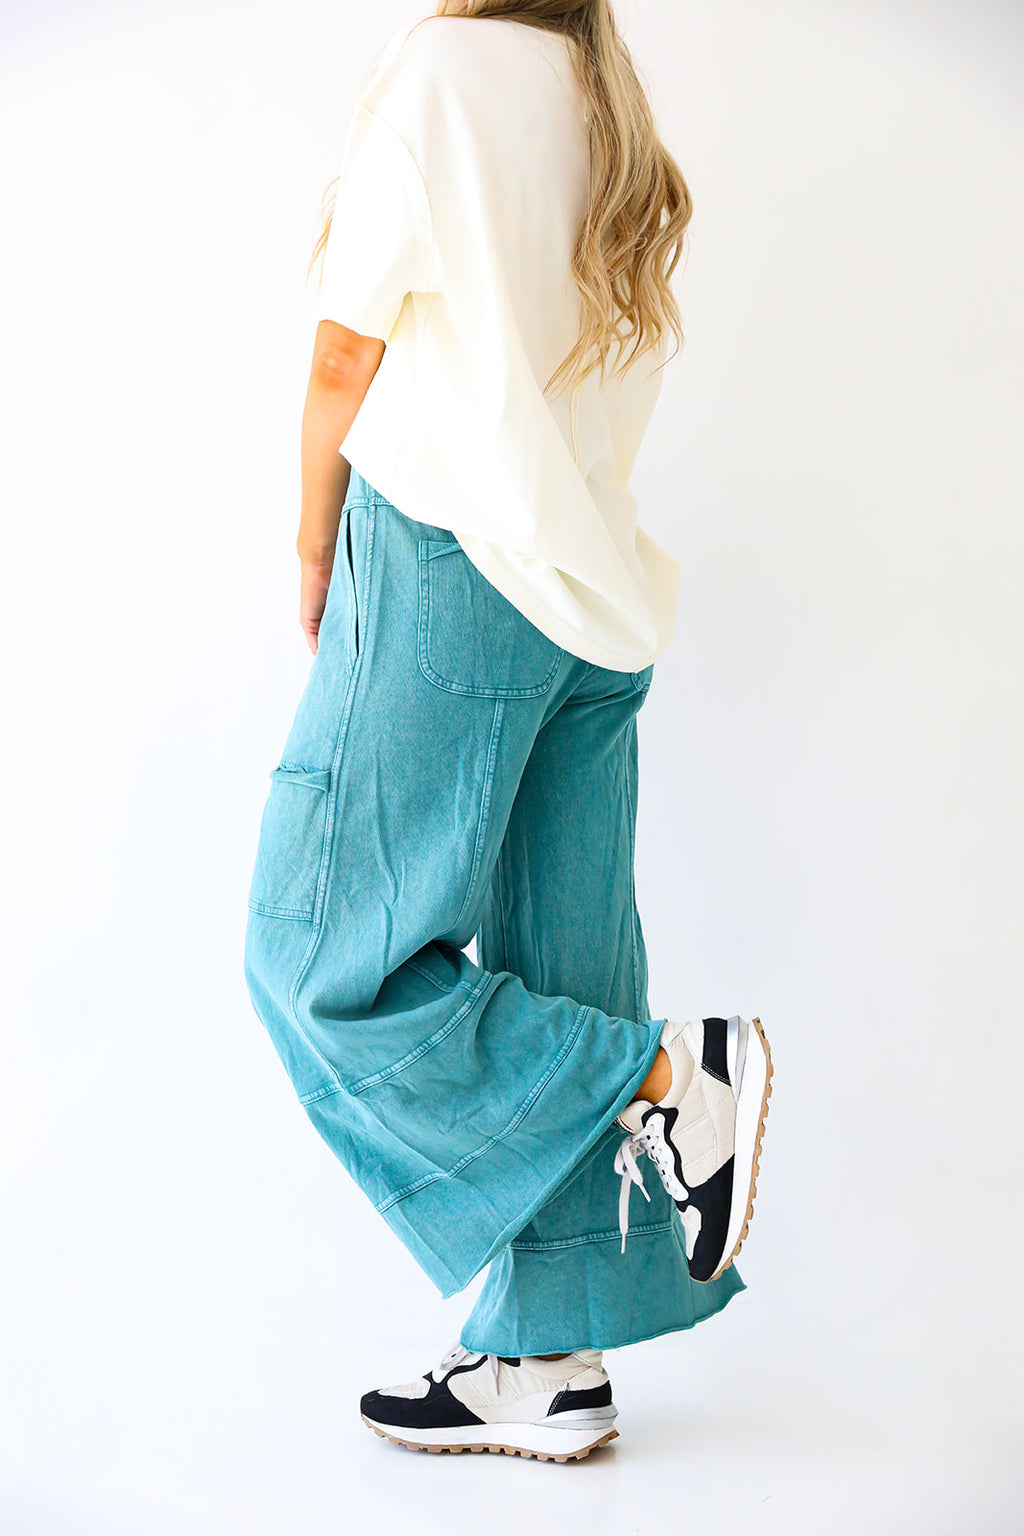 It's a Lifestyle Pants-Teal